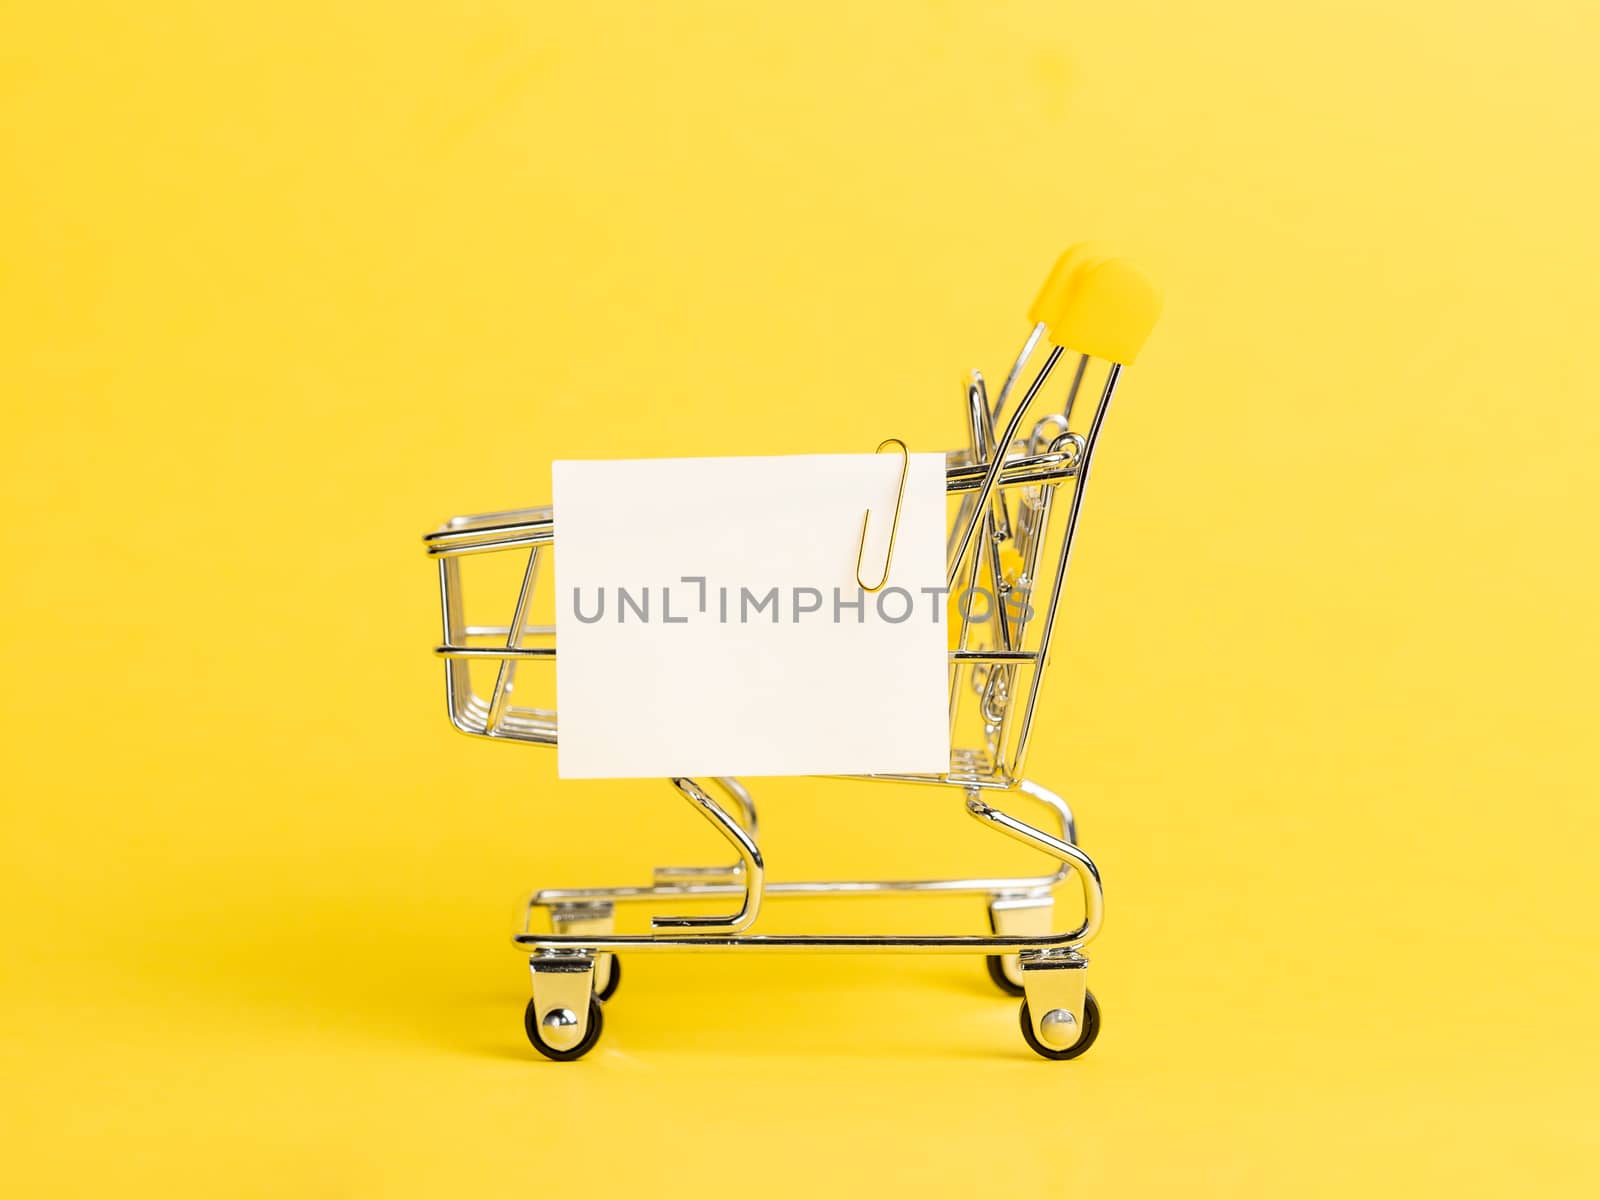 Shopping cart and white paper note list over yellow background. Shopping concept on bright yellow background. Empty white paper note over shopping cart. Copy space for text or design.